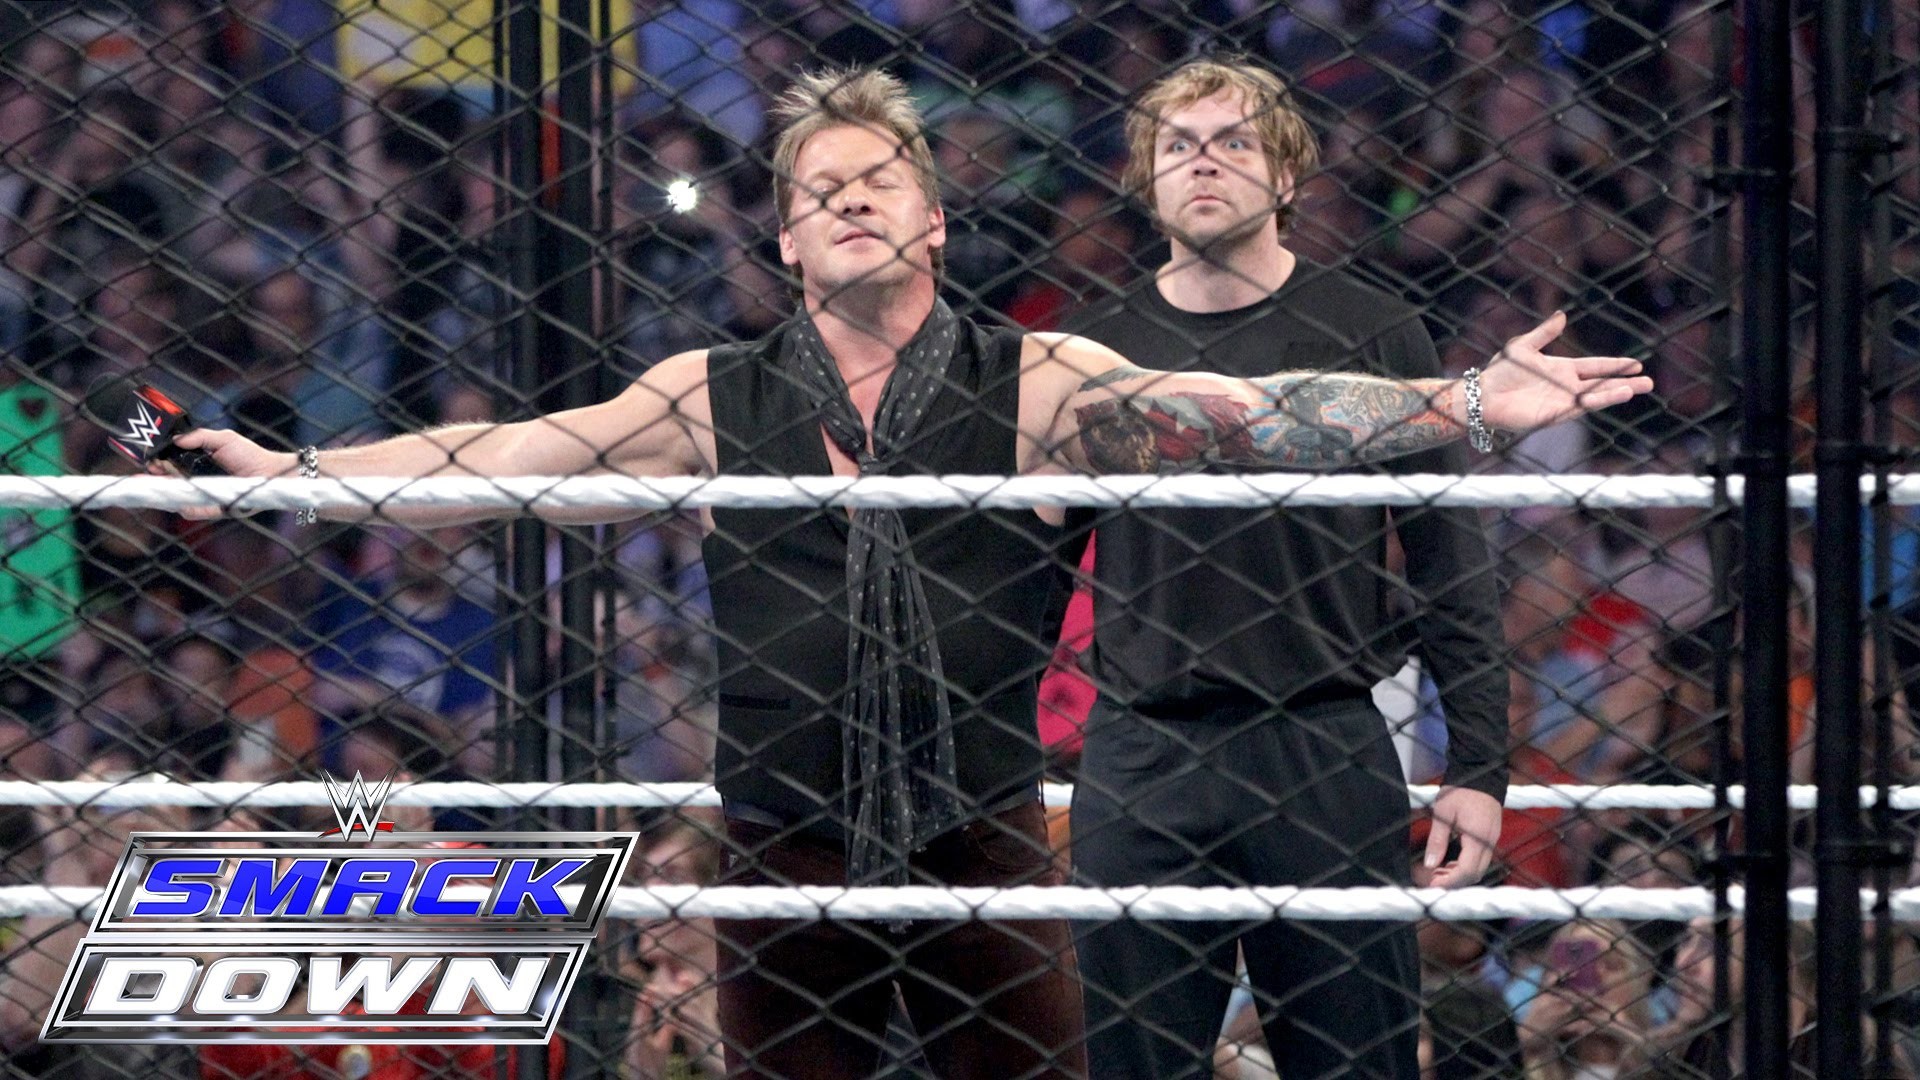 1920x1080 Chris Jericho Explains Why Cages Have Doors, Cameron Teases Big News